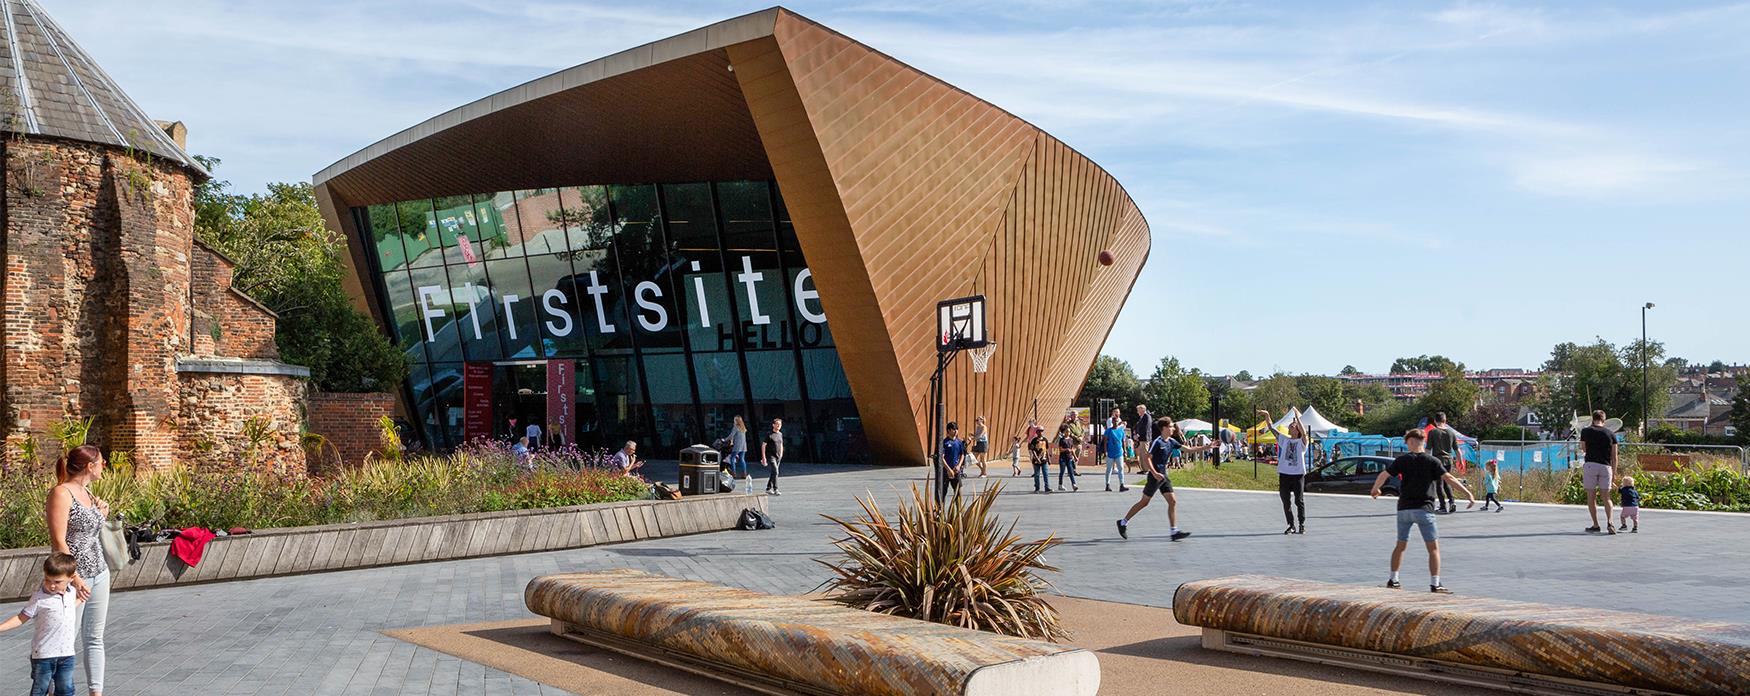 An exterior shot of Firstsite gallery with people in the foreground